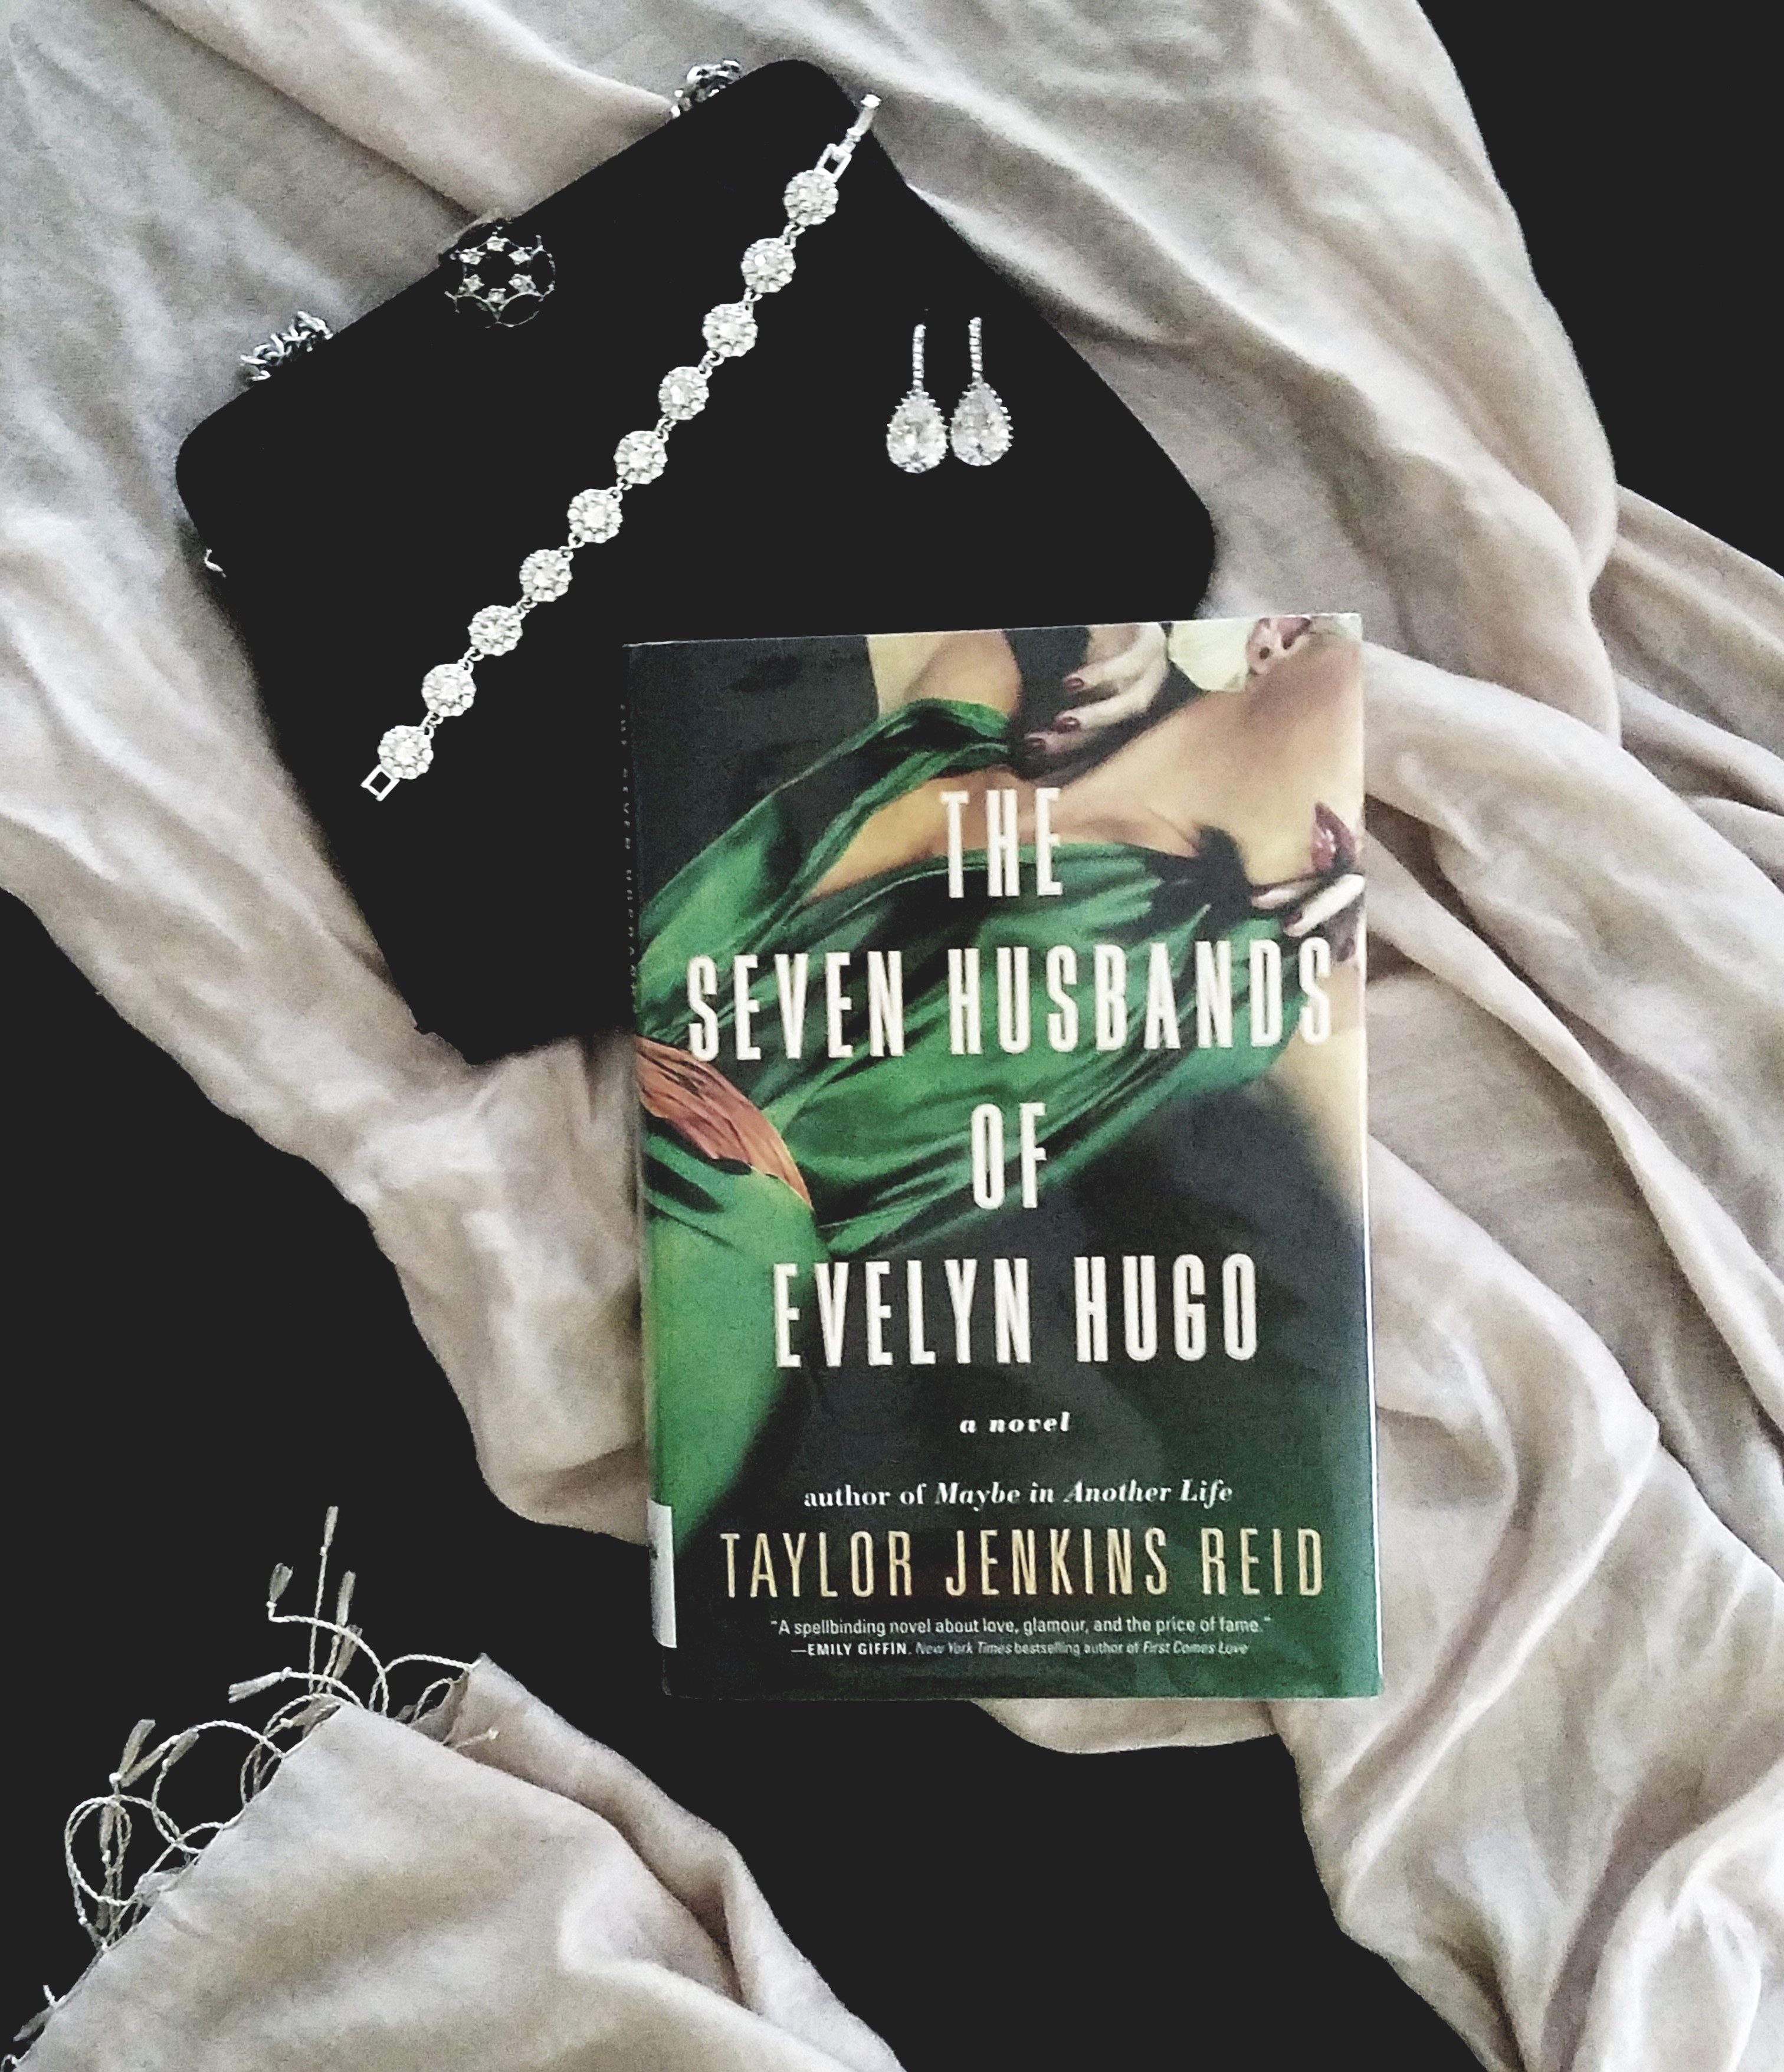 Book Review of THE SEVEN HUSBANDS OF EVELYN HUGO